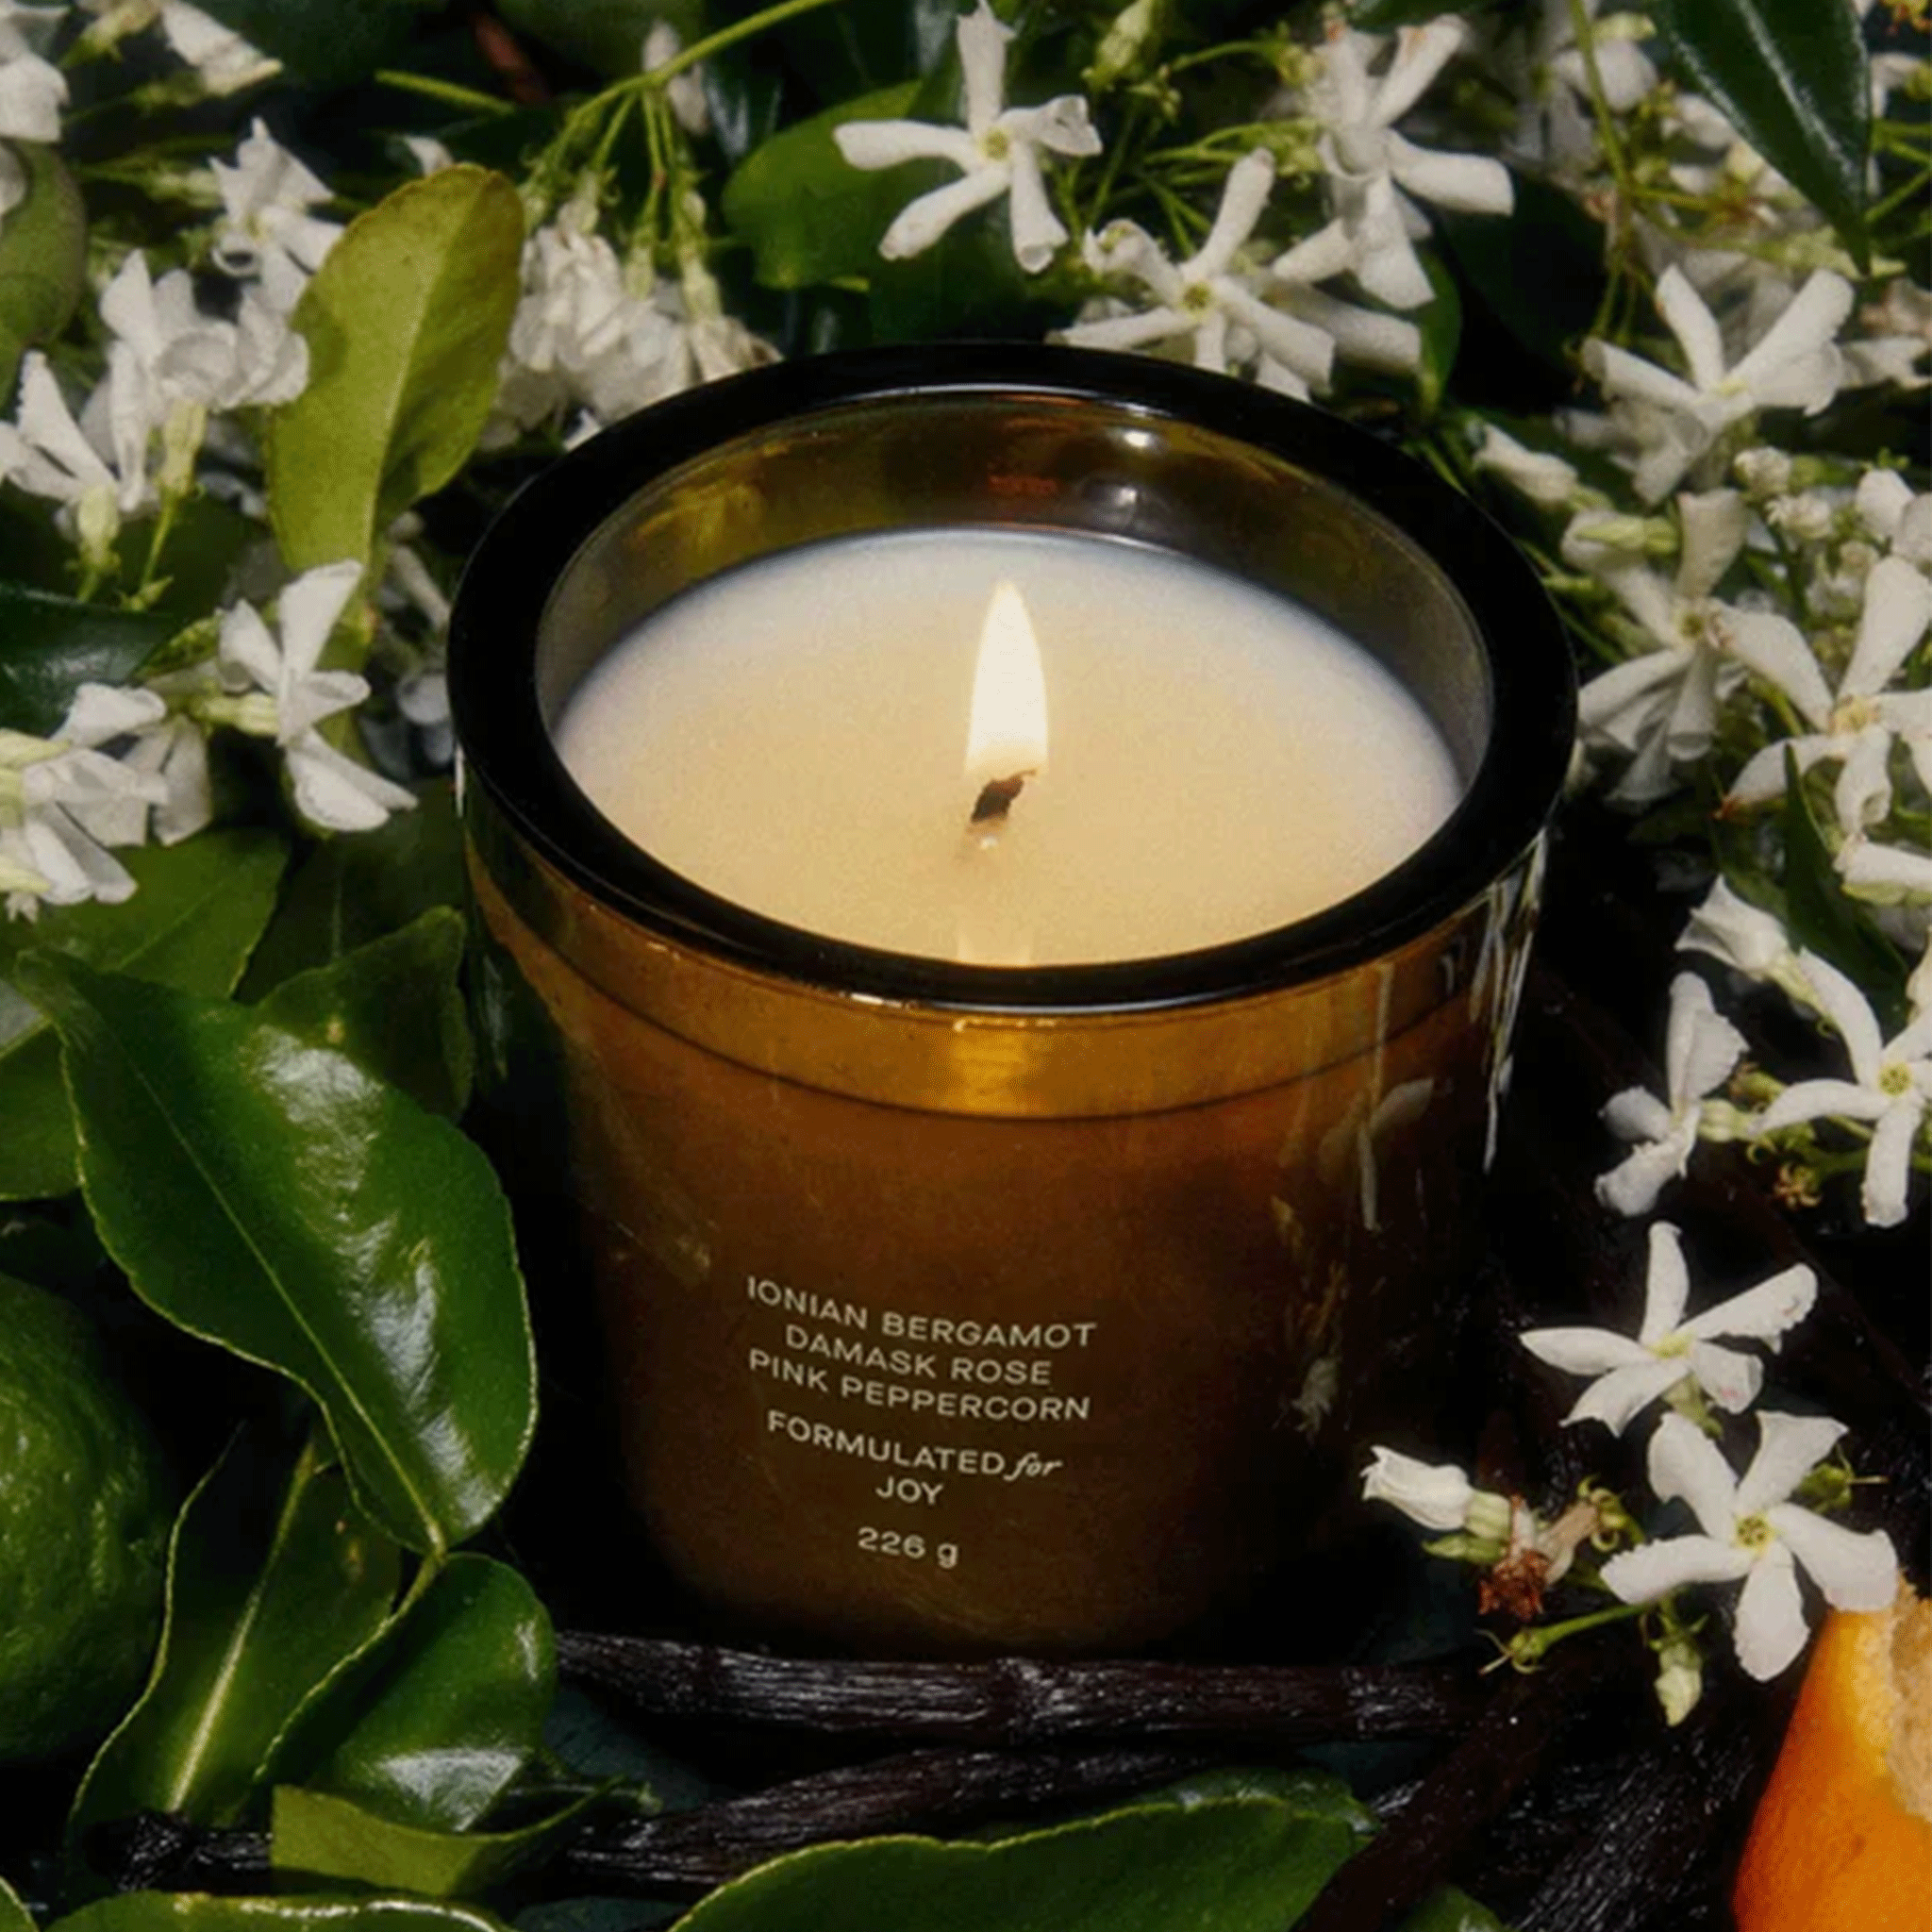 A glass candle with white wax and small text that reads, "Ionian Bergamot Damask Rose Pink Peppercorn Formulated for Joy".